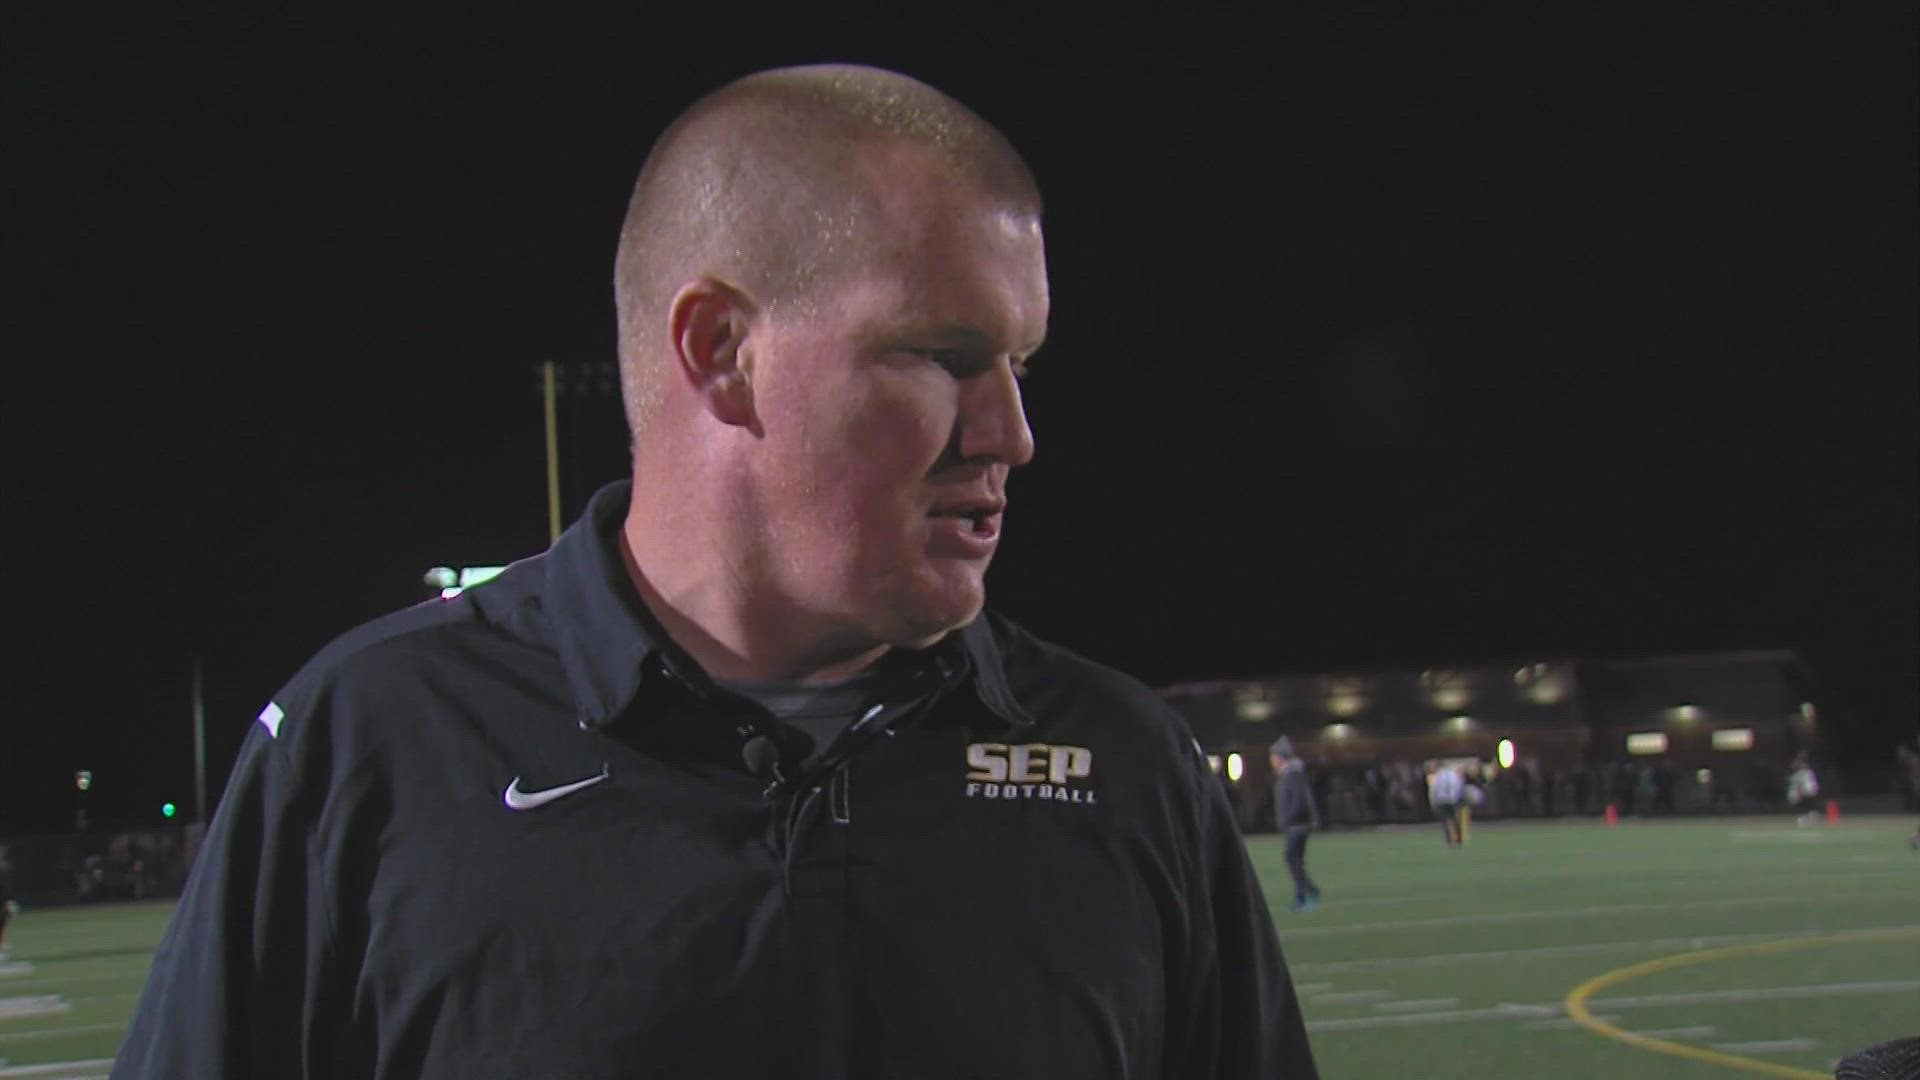 "They love each other, and you can tell that," Hendrickson said after Southeast Polk's 16-0 win over Ankeny Centennial.